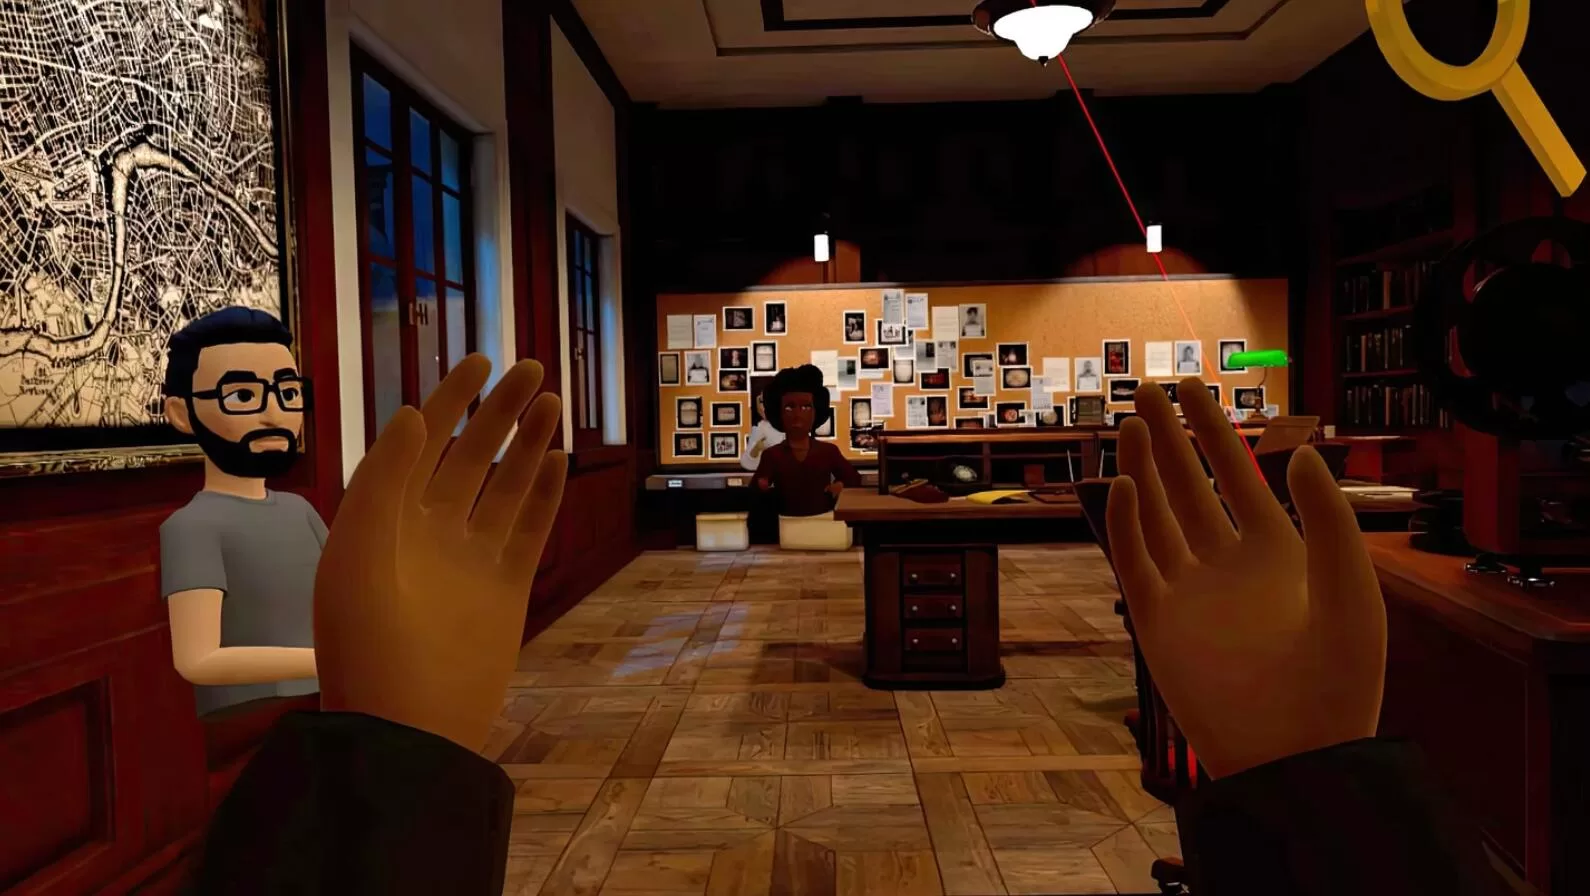 Oculus Quest 游戏《福尔摩斯 悬浮议会案》Sherlock Holmes- The Case of the Hung Parliament